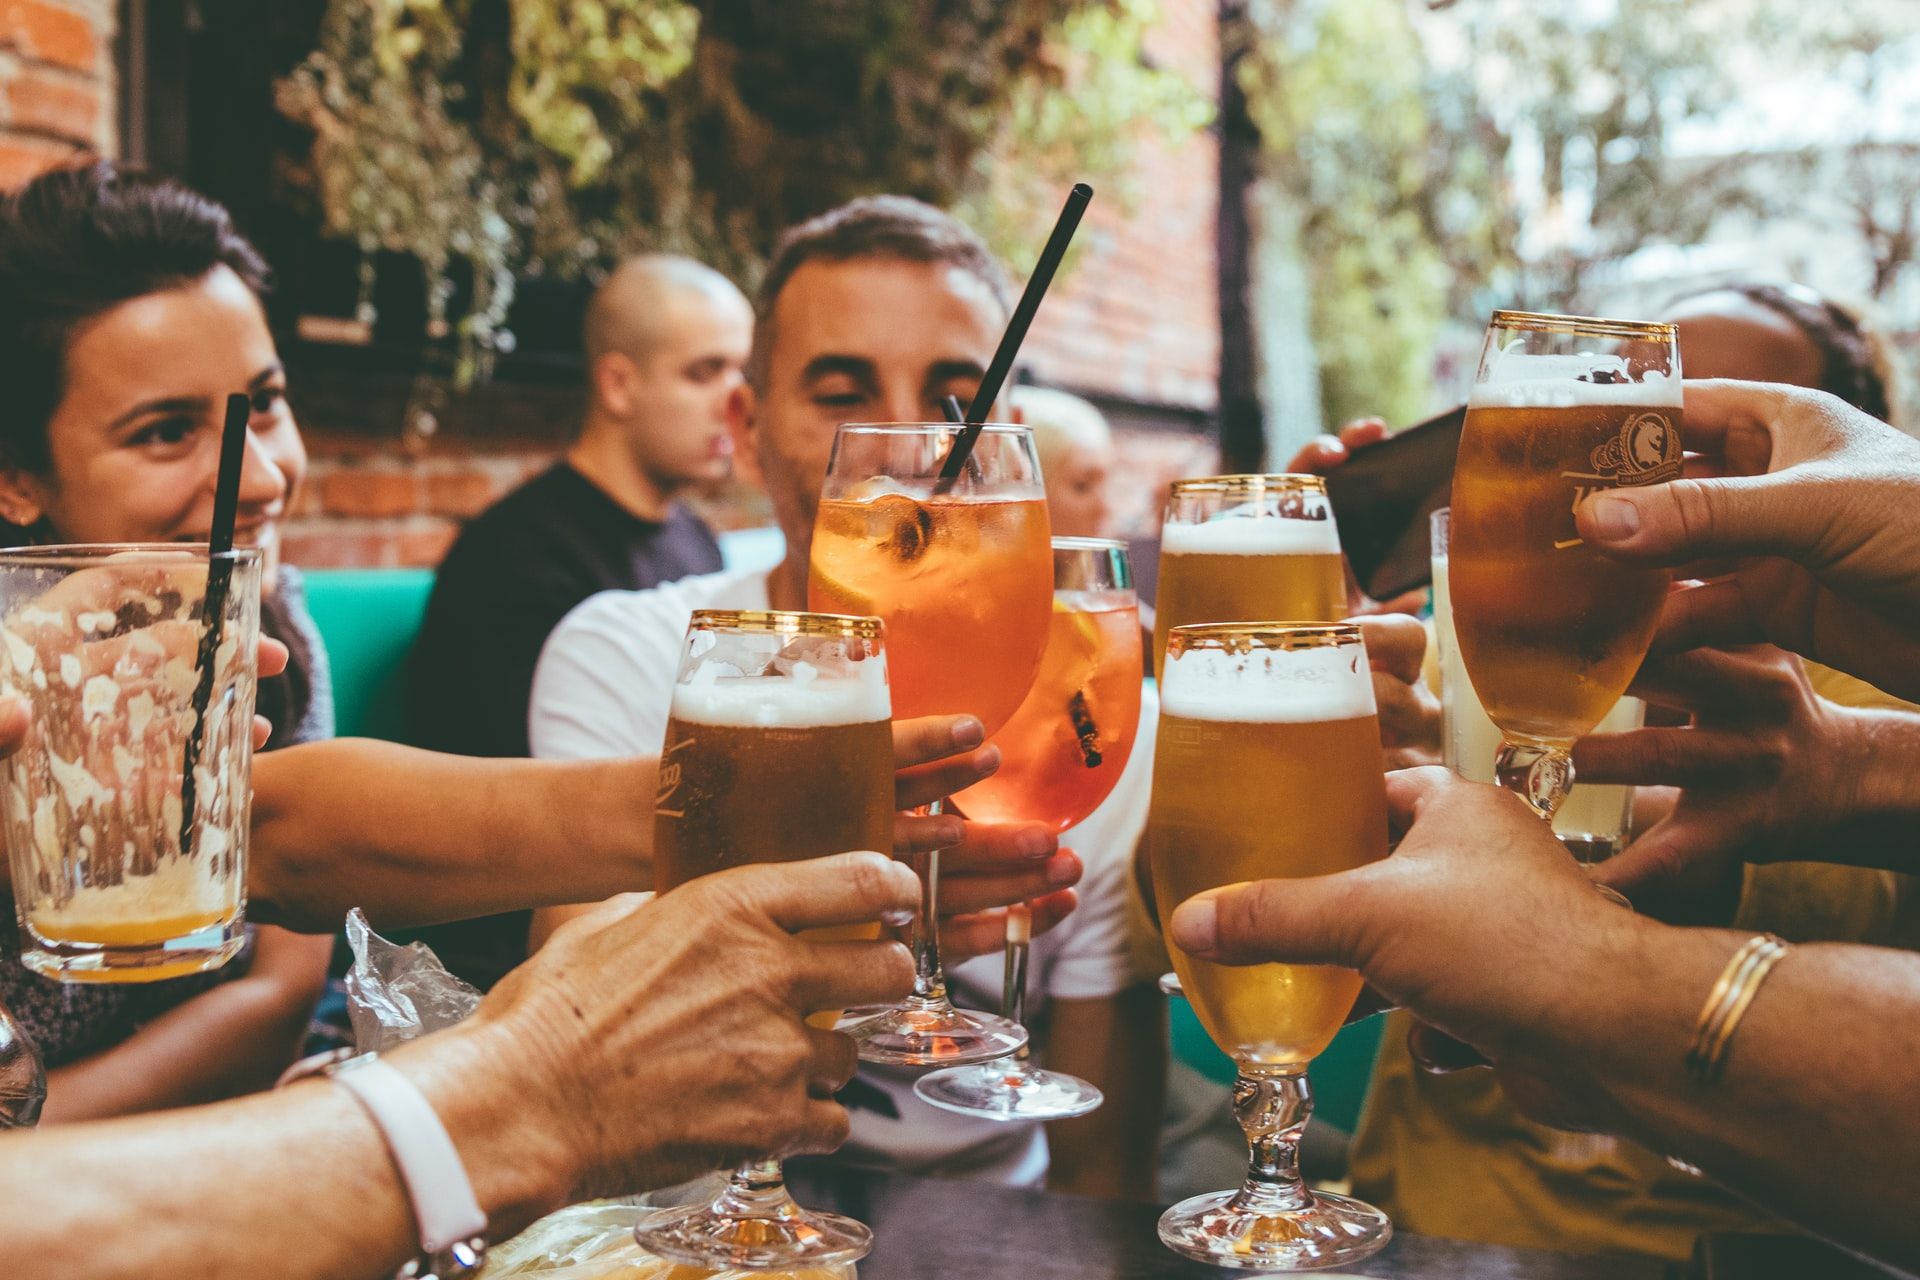 Craft beer tasting - attractions for corporate events